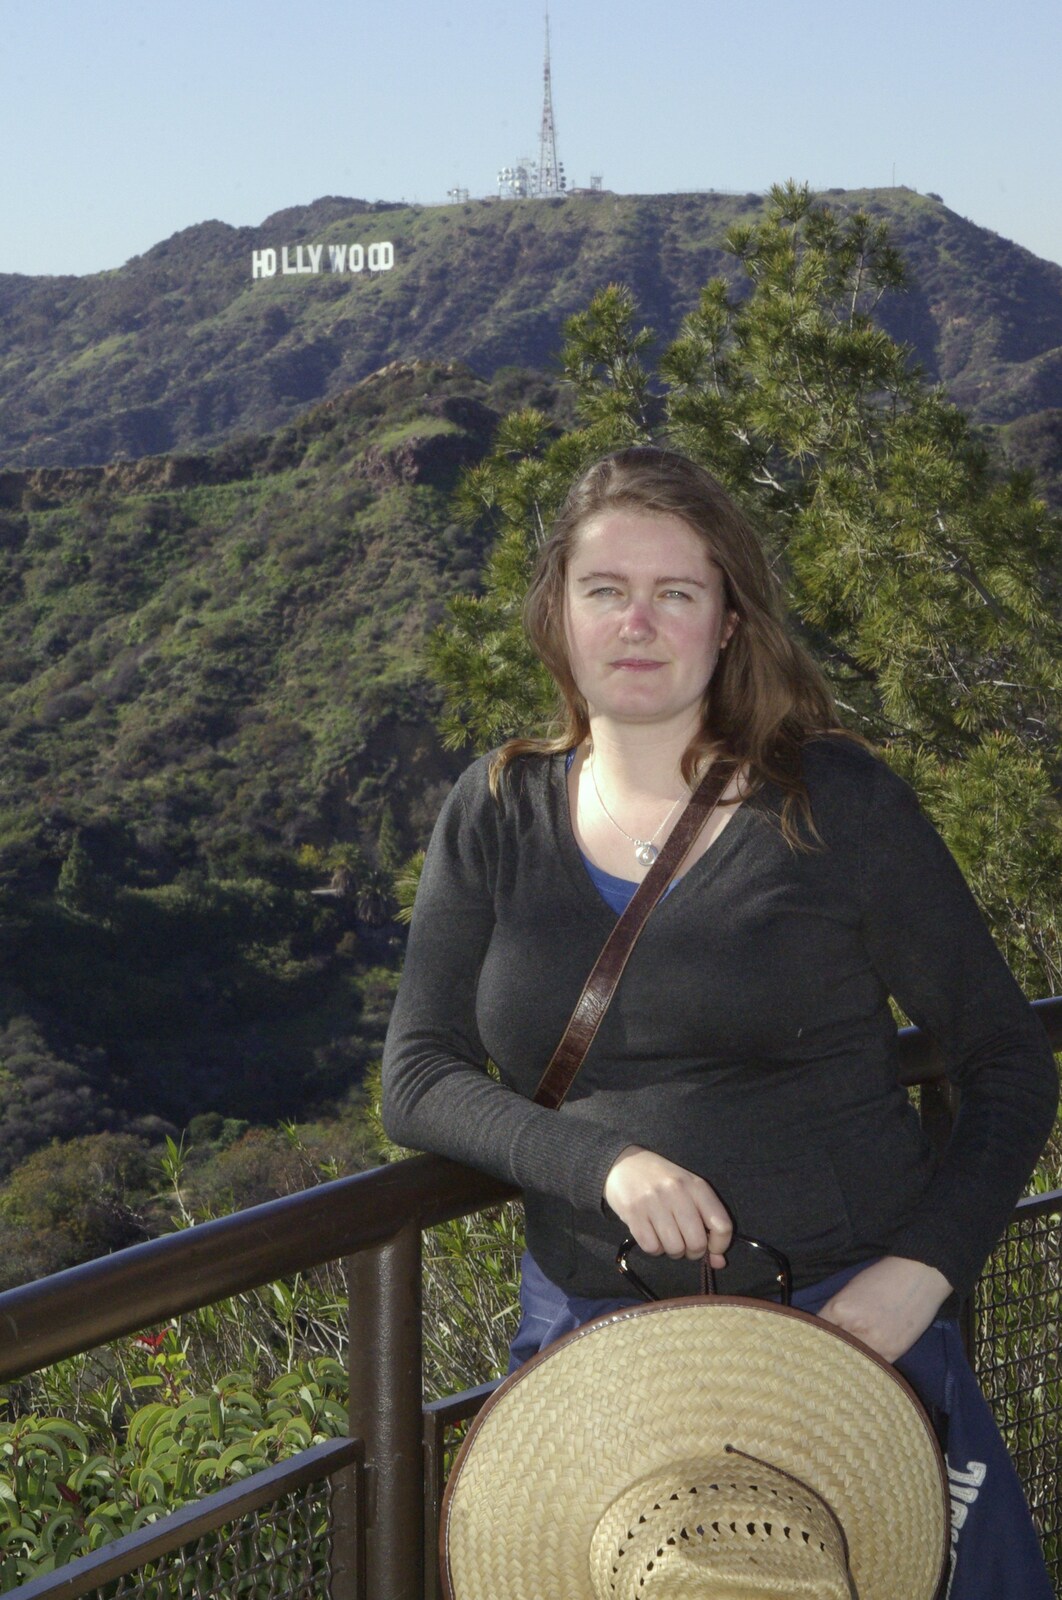 San Diego and Hollywood, California, US - 3rd March 2008: Isobel and the Hollywood sign